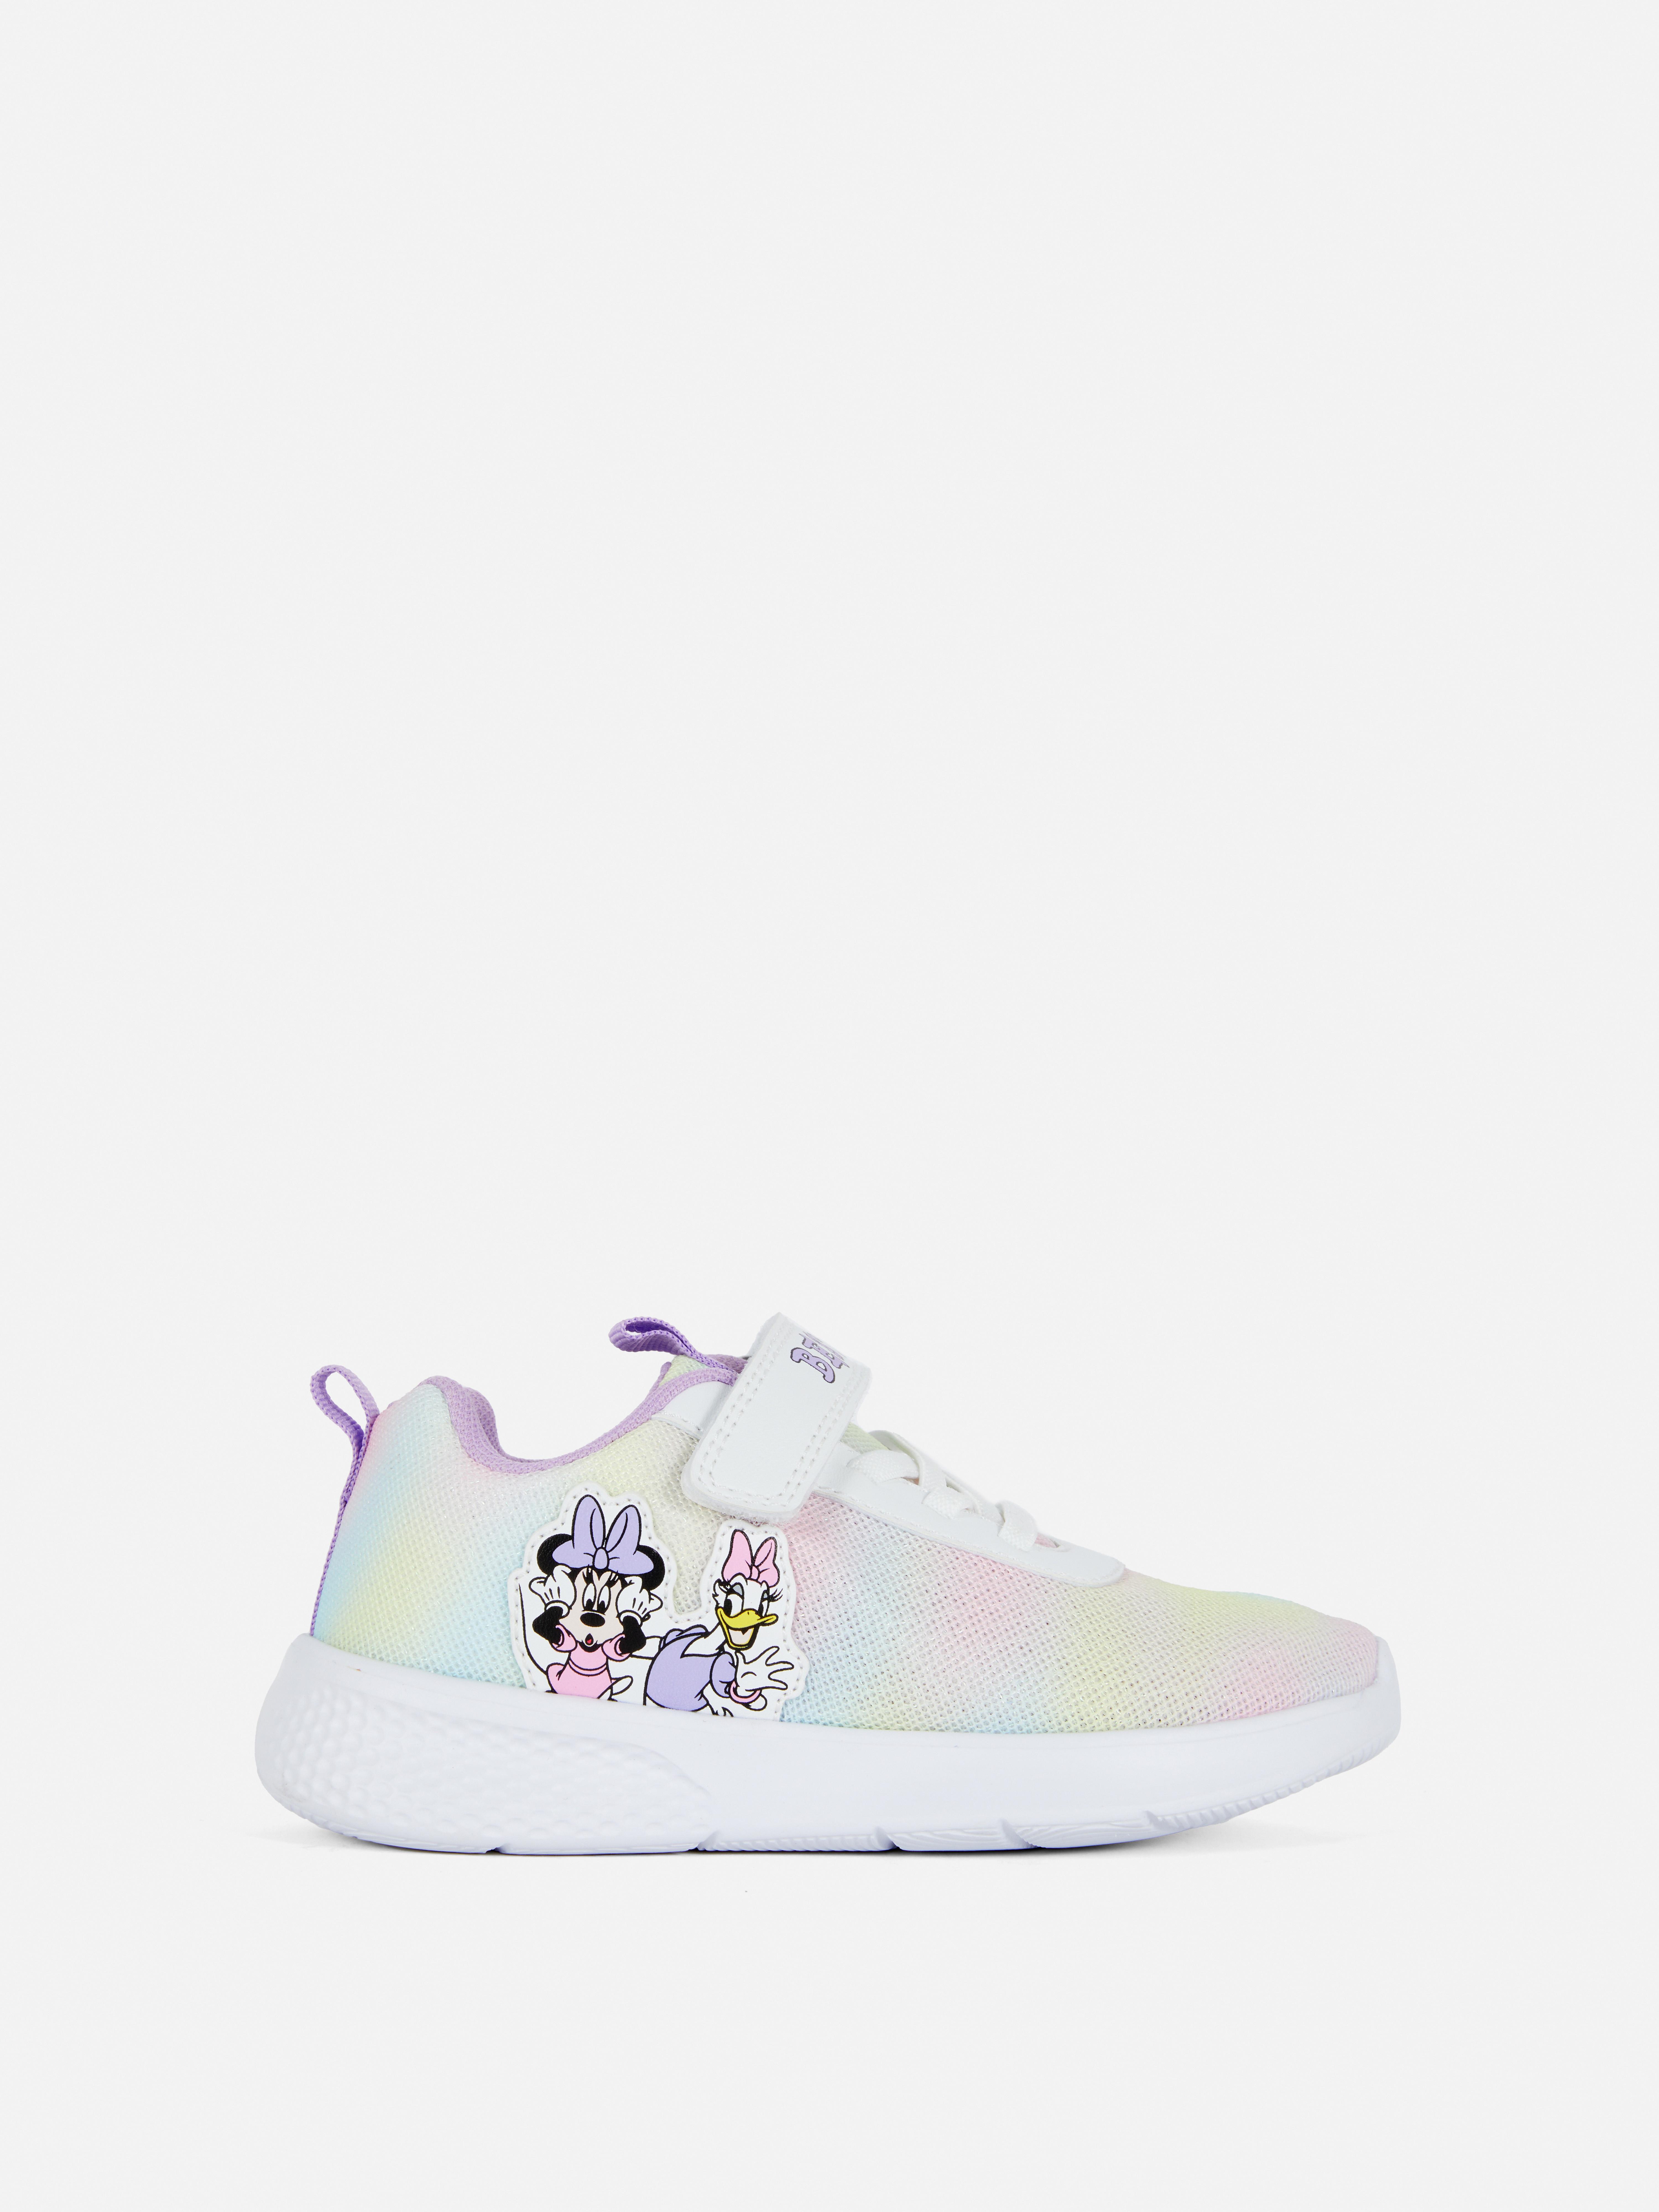 Disney’s Minnie Mouse and Daisy Duck Tie-Dye Trainers